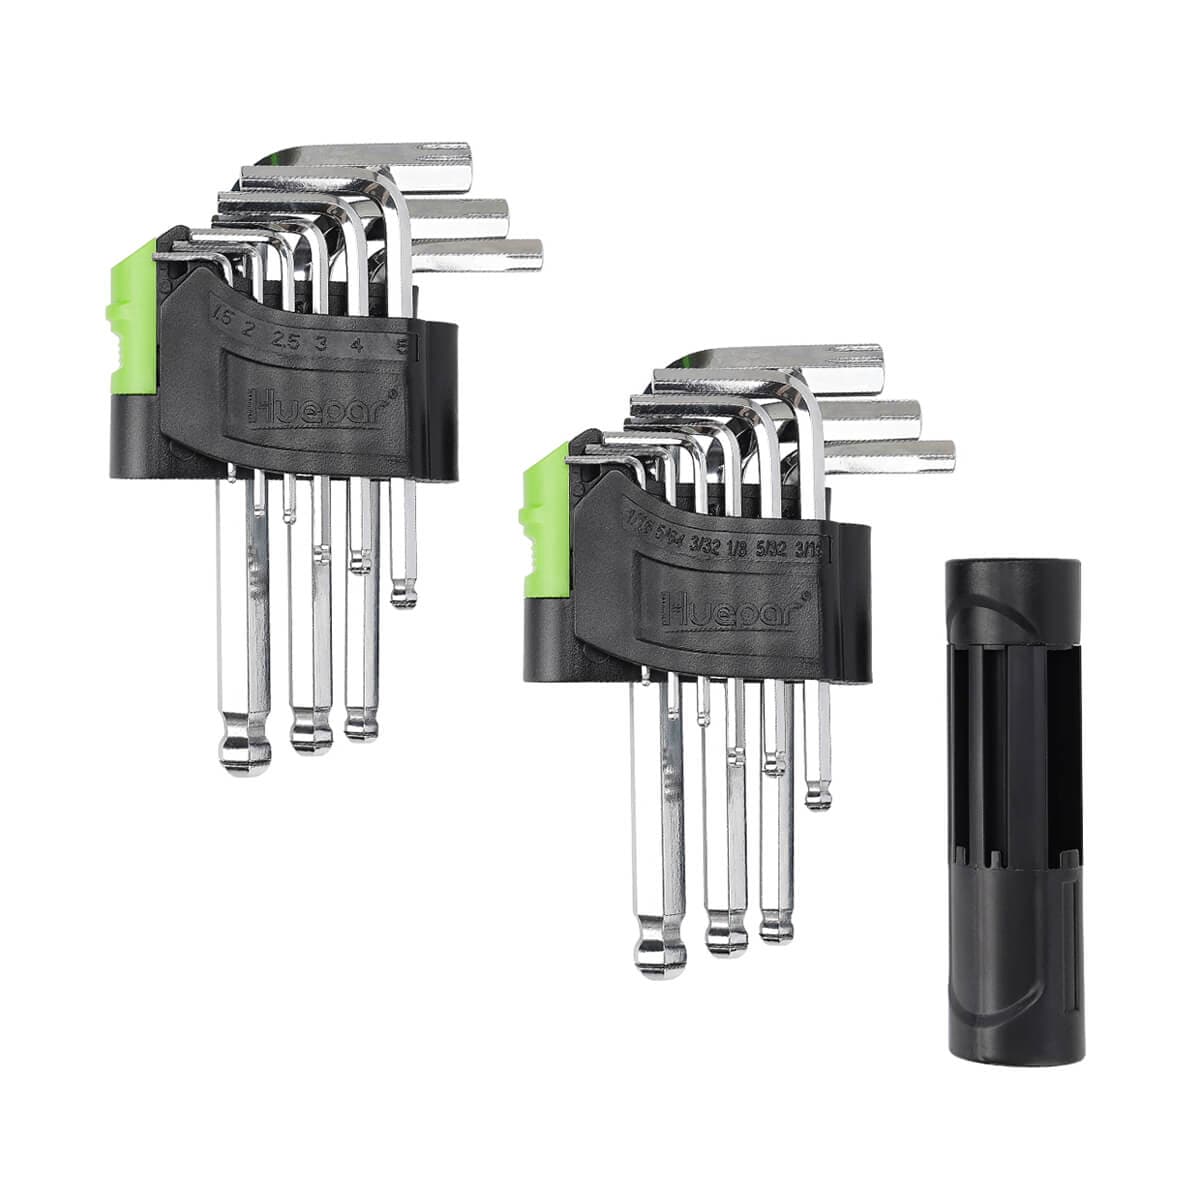 Huepar Magnetic Screwdriver Set with 3 Slotted and 3 Phillips Heads, Diamond Tip, Rust Resistant Shaft, Professional 6PCS Kit, Advanced Technology, Best Laser Level, Free Shipping1